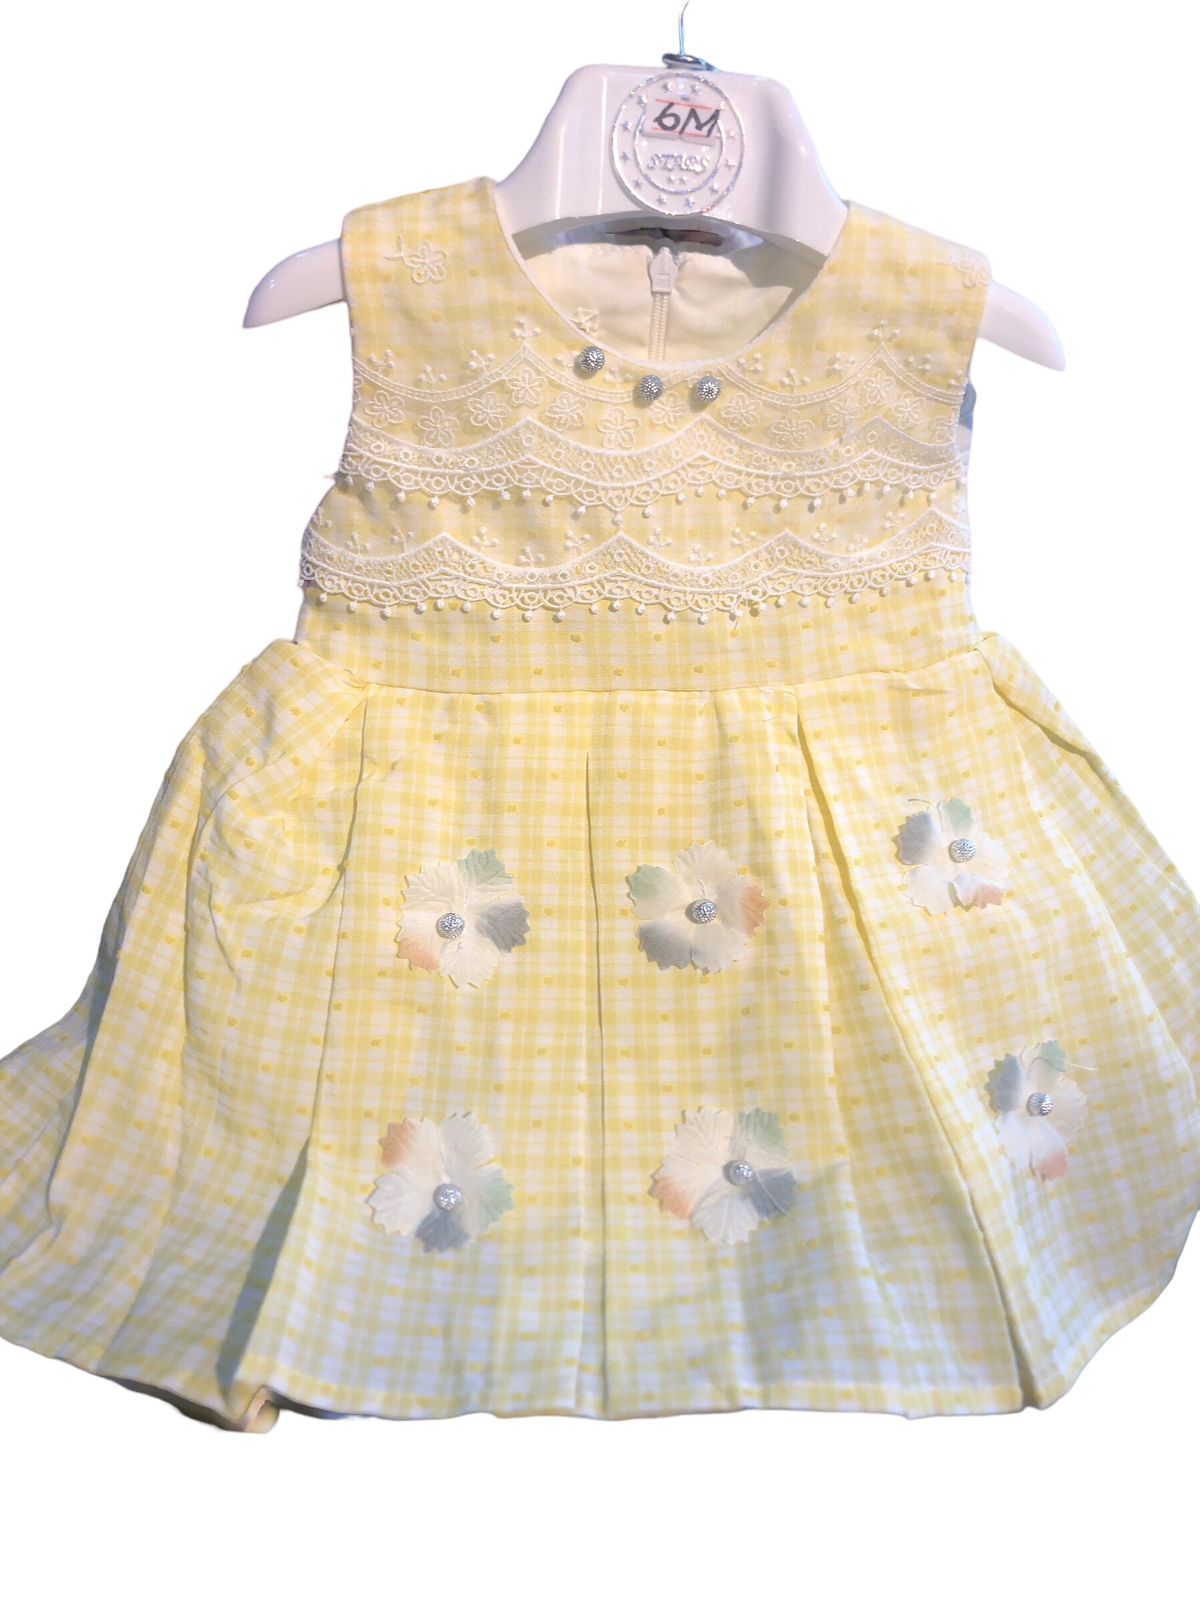 Baby frocks